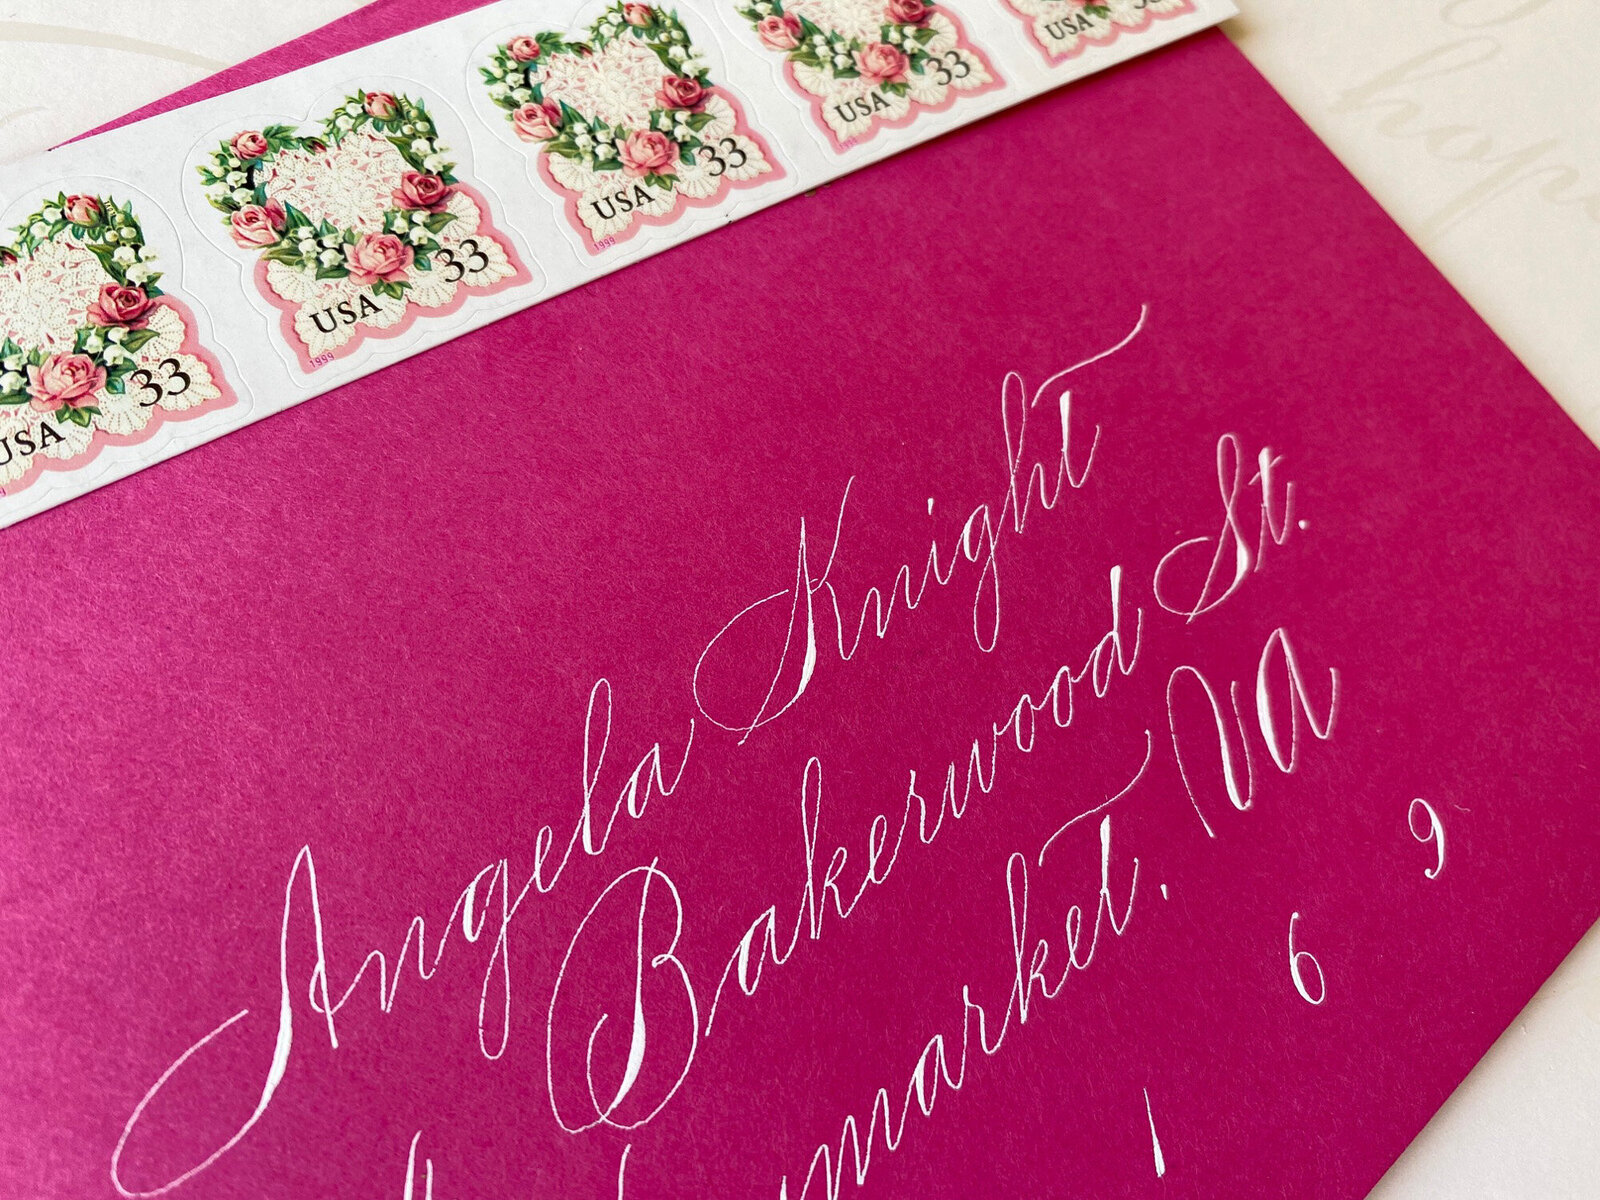 Pink envelope with custom calligraphy and stamps